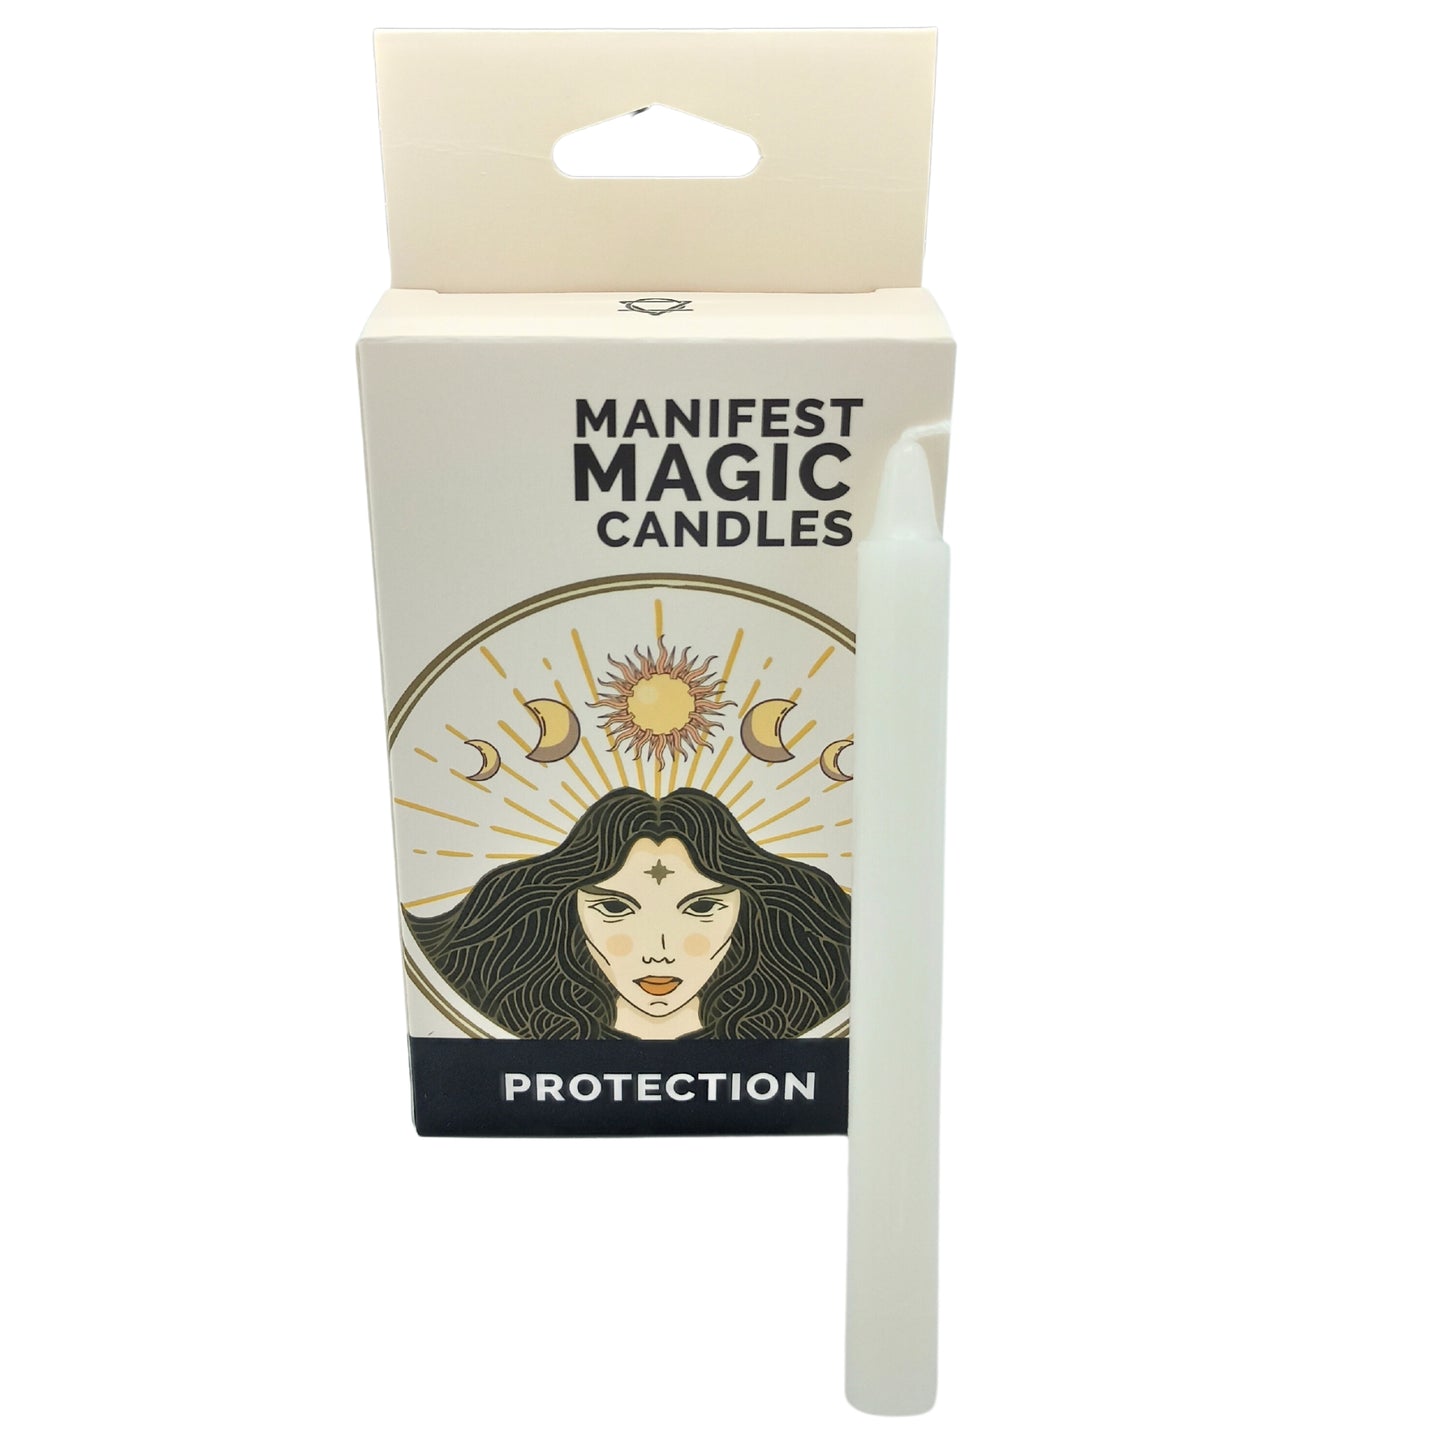 Manifest Magic Candles (pack of 12) - Ivory - Kaftans direct